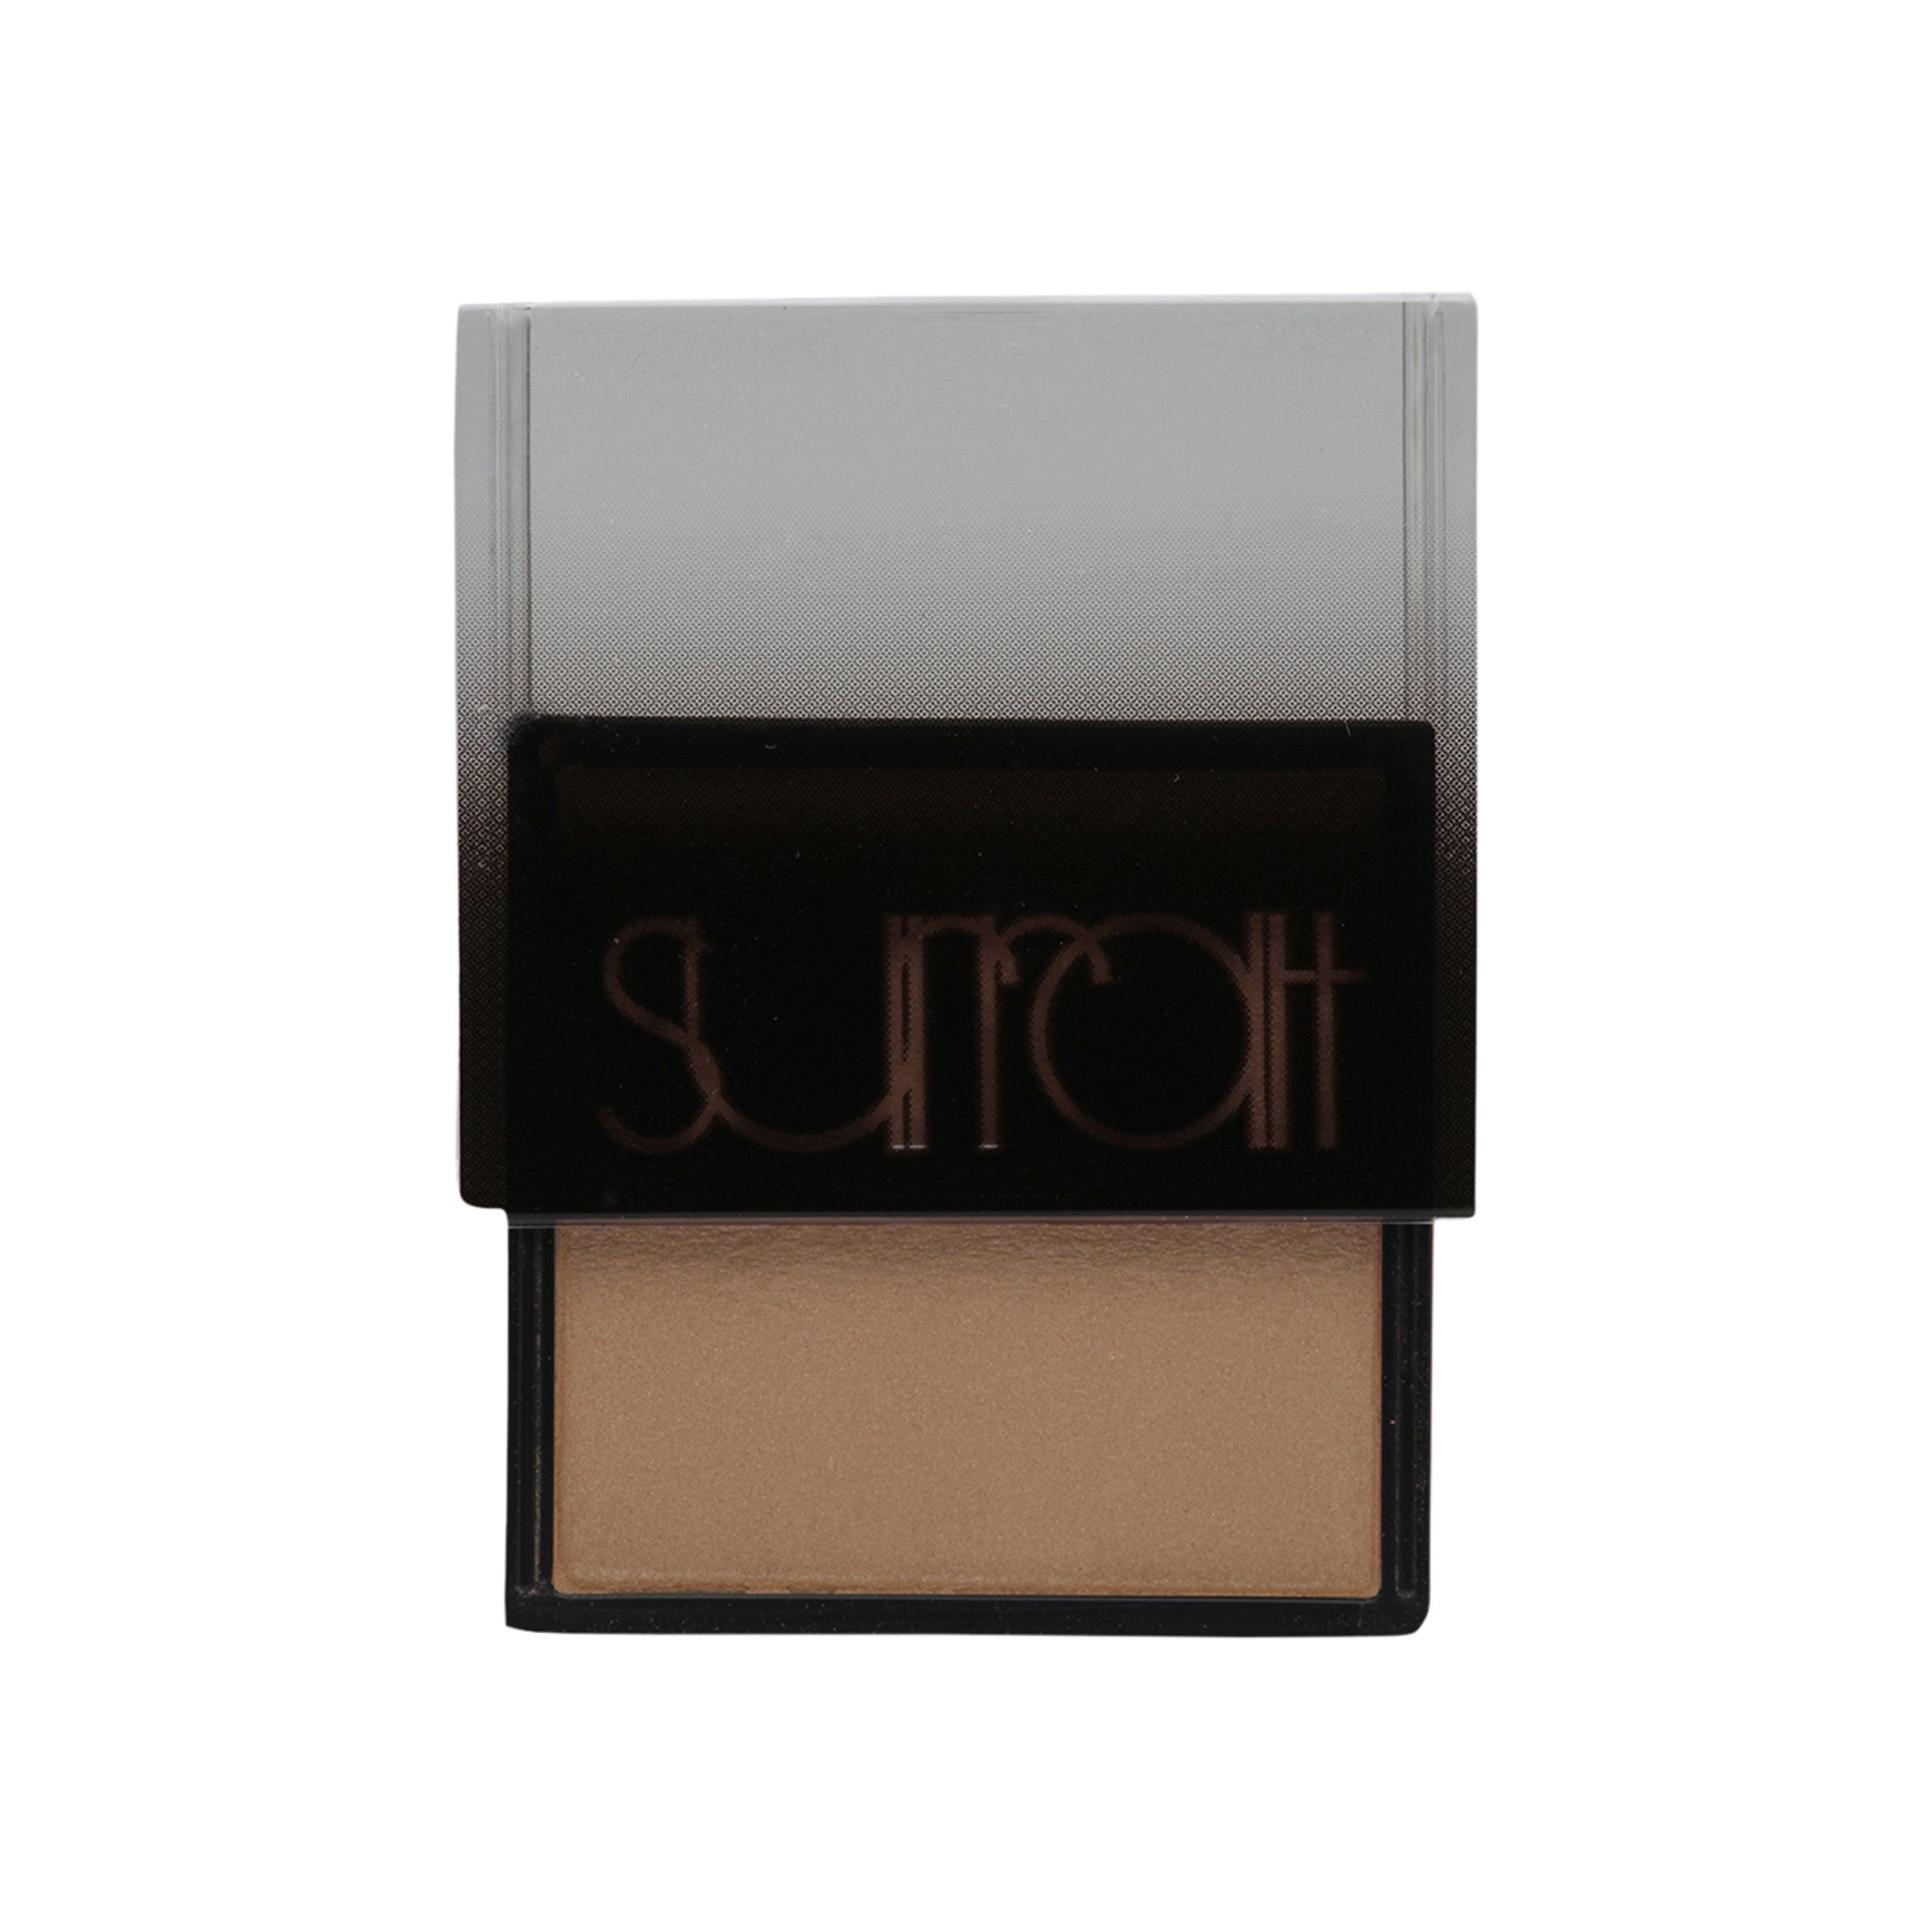 Surratt Artistique Eyeshadow Color/Shade variant: Griège (Matte Grey Taupe) main image. This product is in the color nude